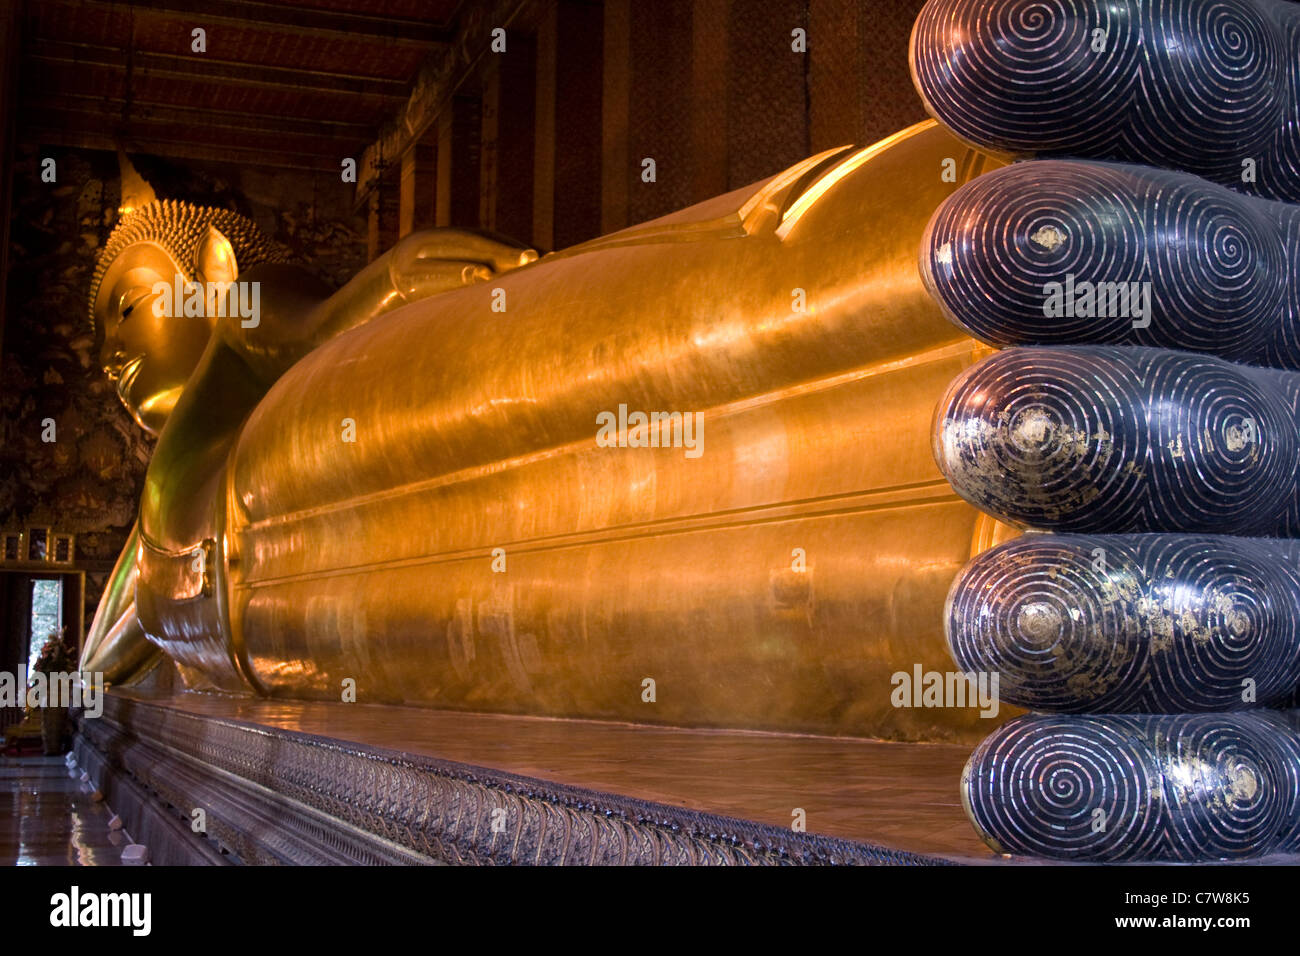 Wat Pho, also known as the Temple of the Reclining Buddha in Bangkok, Thailand. Stock Photo